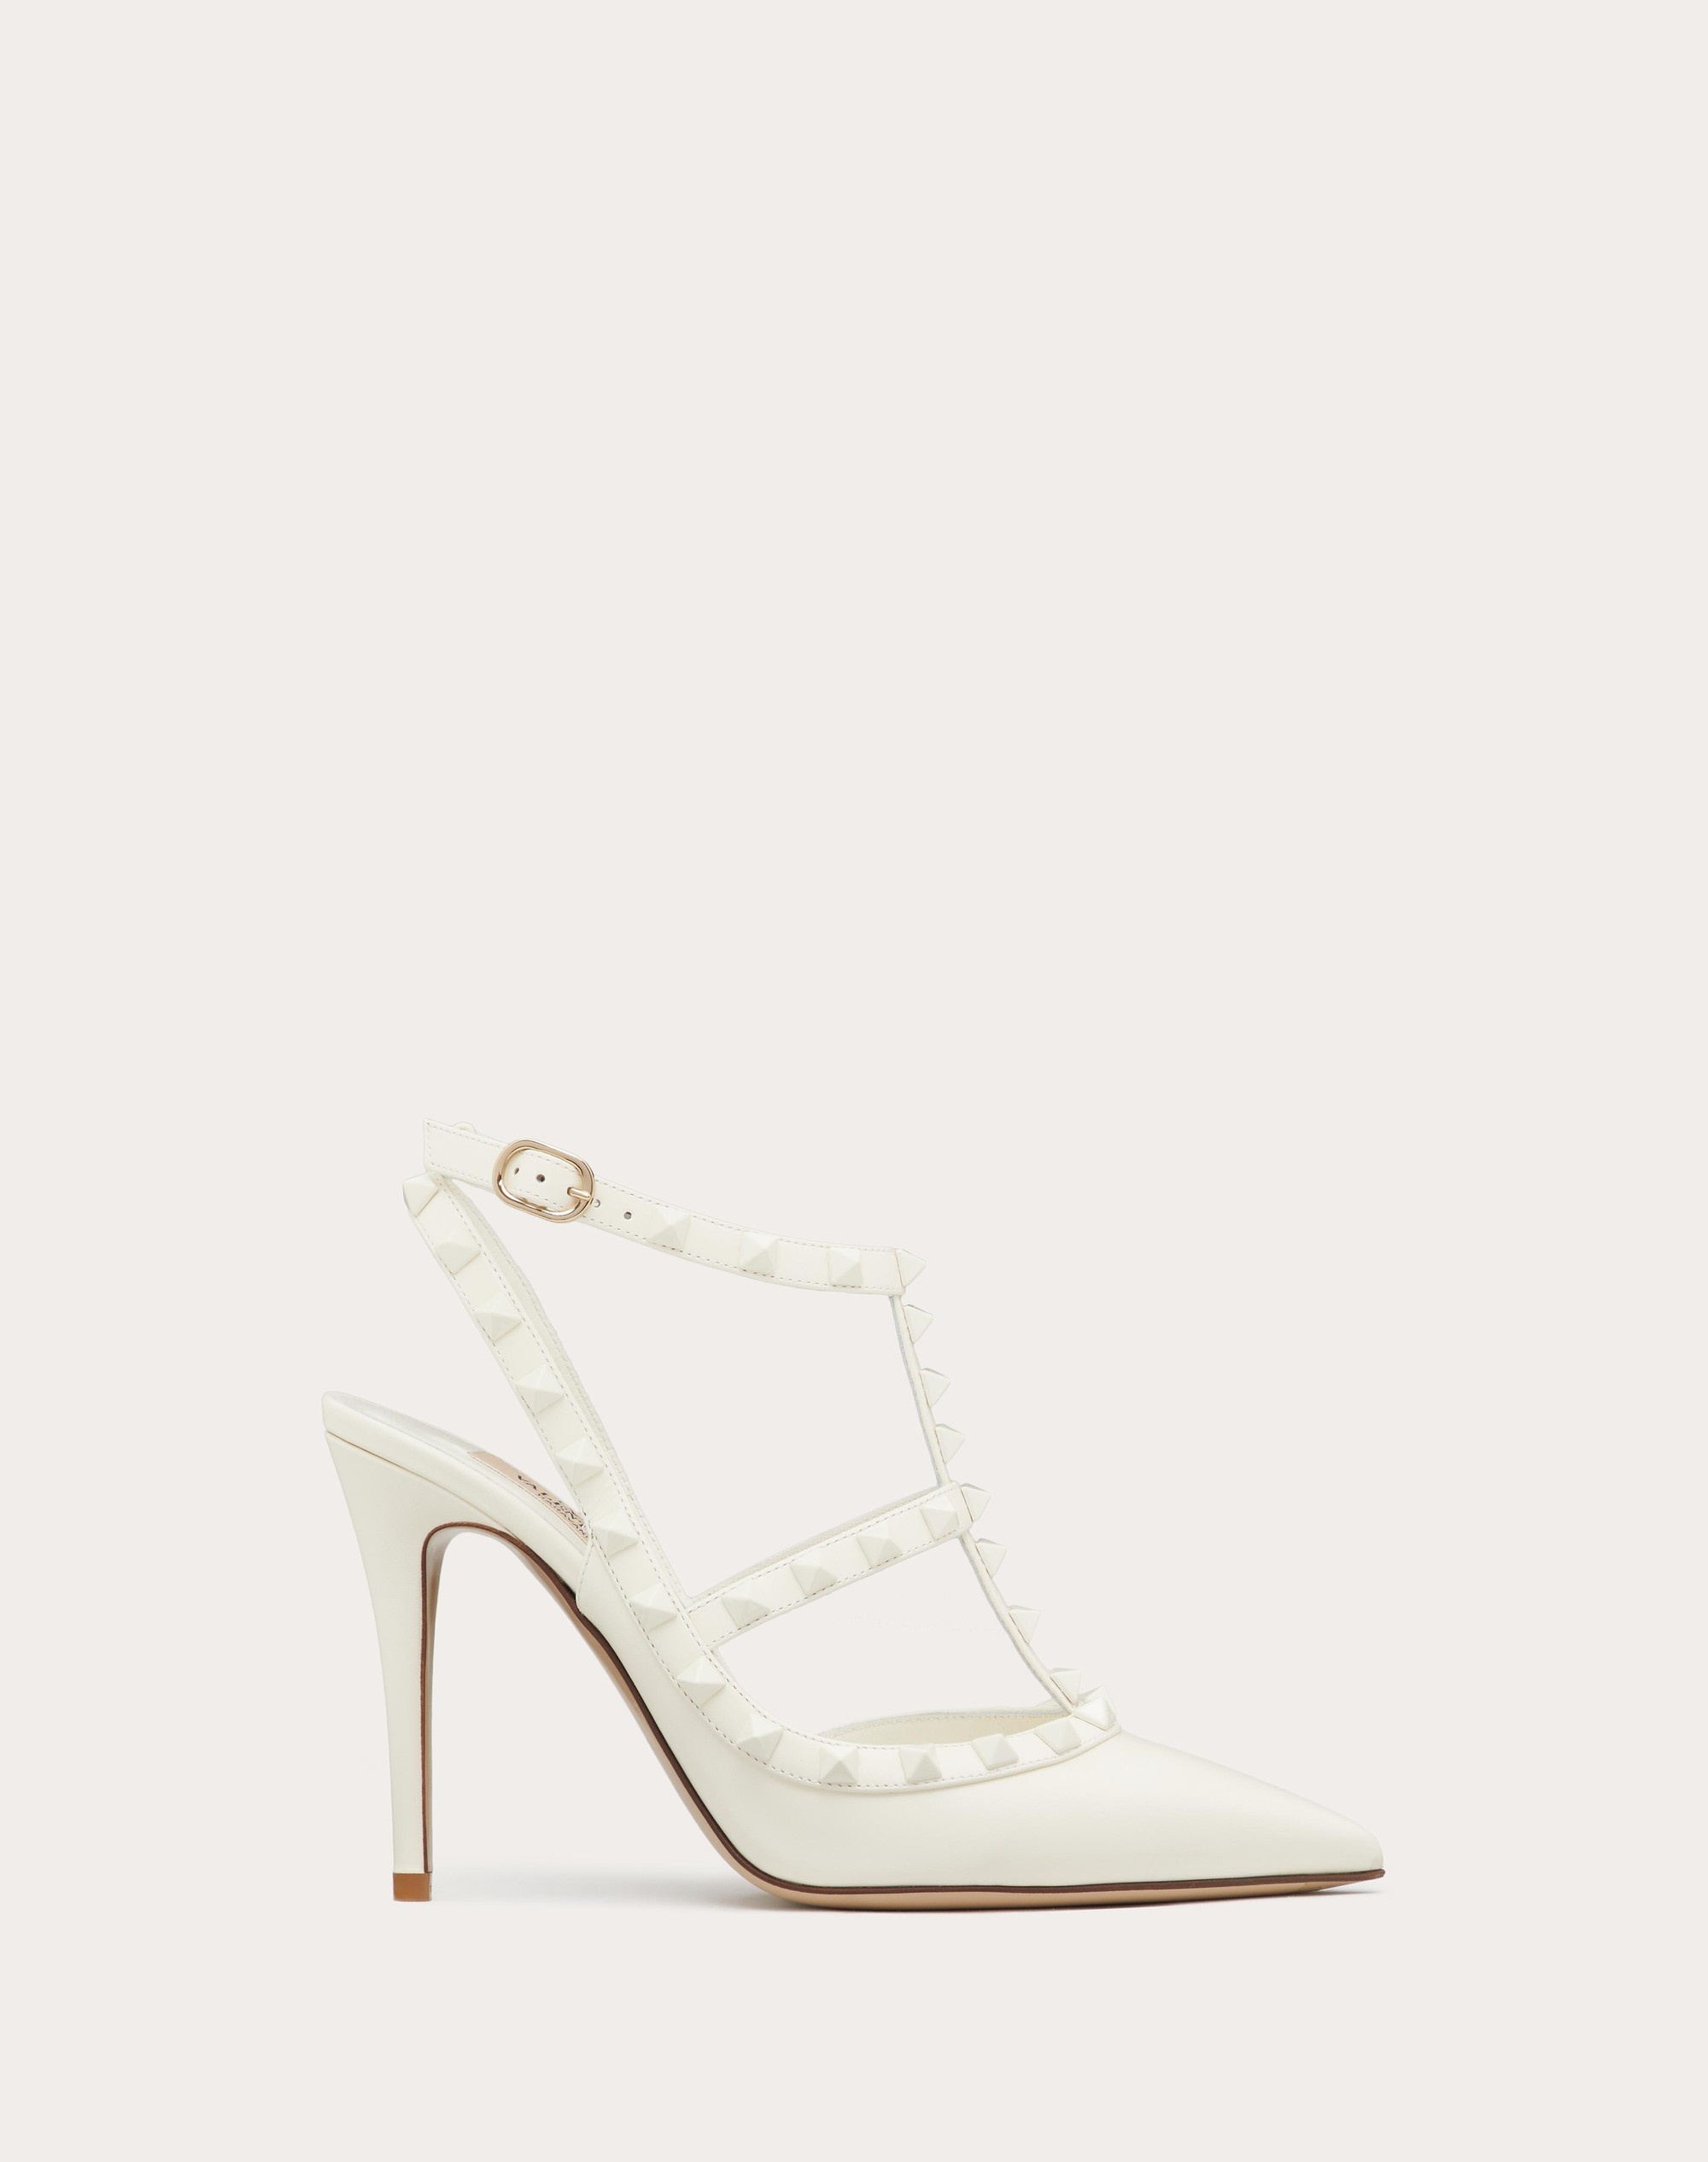 ROCKSTUD ANKLE STRAP PUMP WITH TONAL STUDS 100 MM